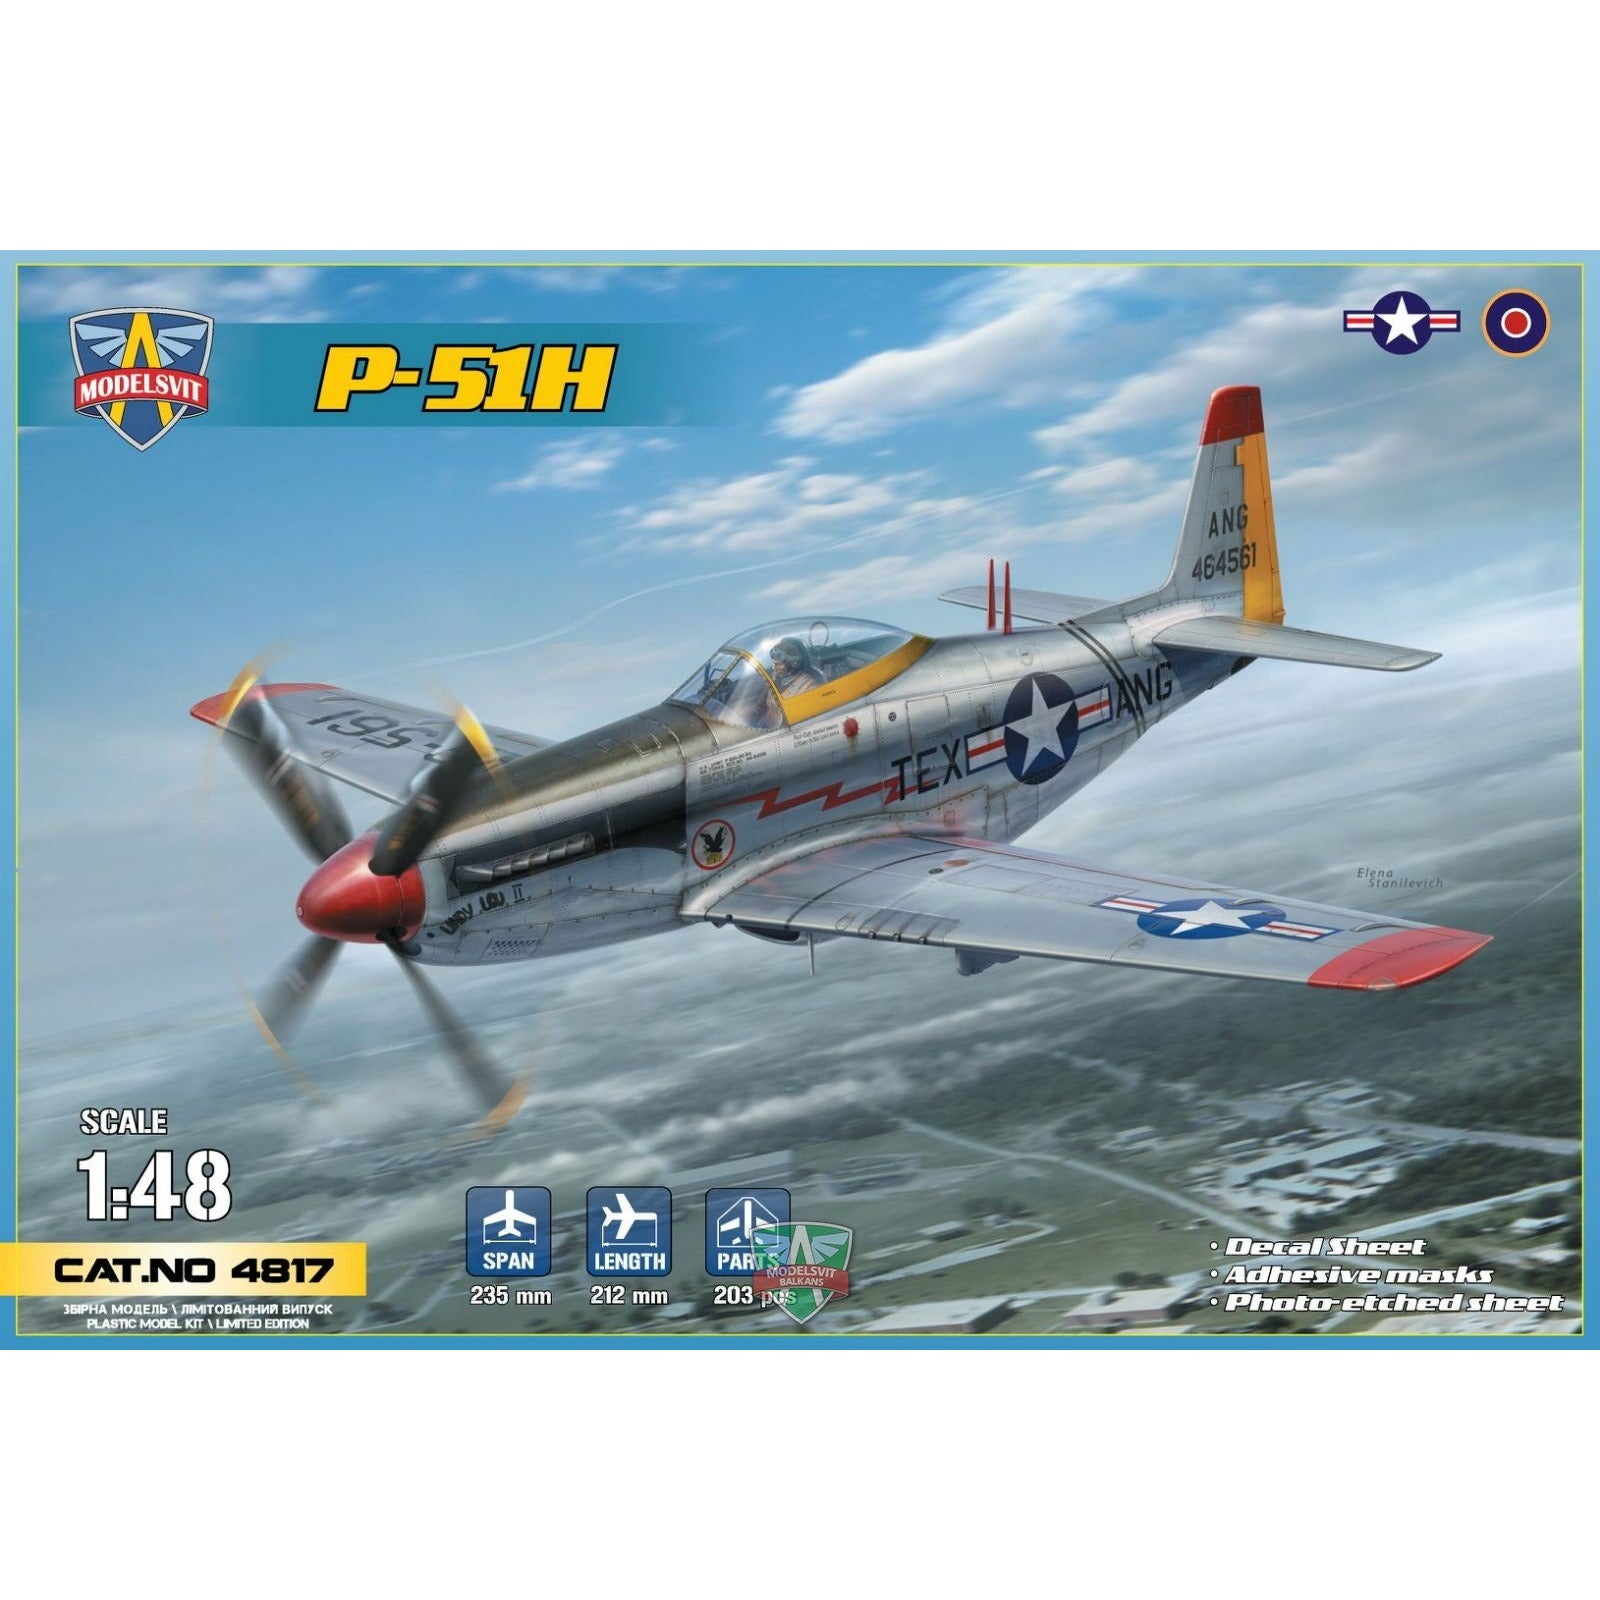 P-51H Mustang (6 camo schemes) 1/48 #4817 by Modelsvit